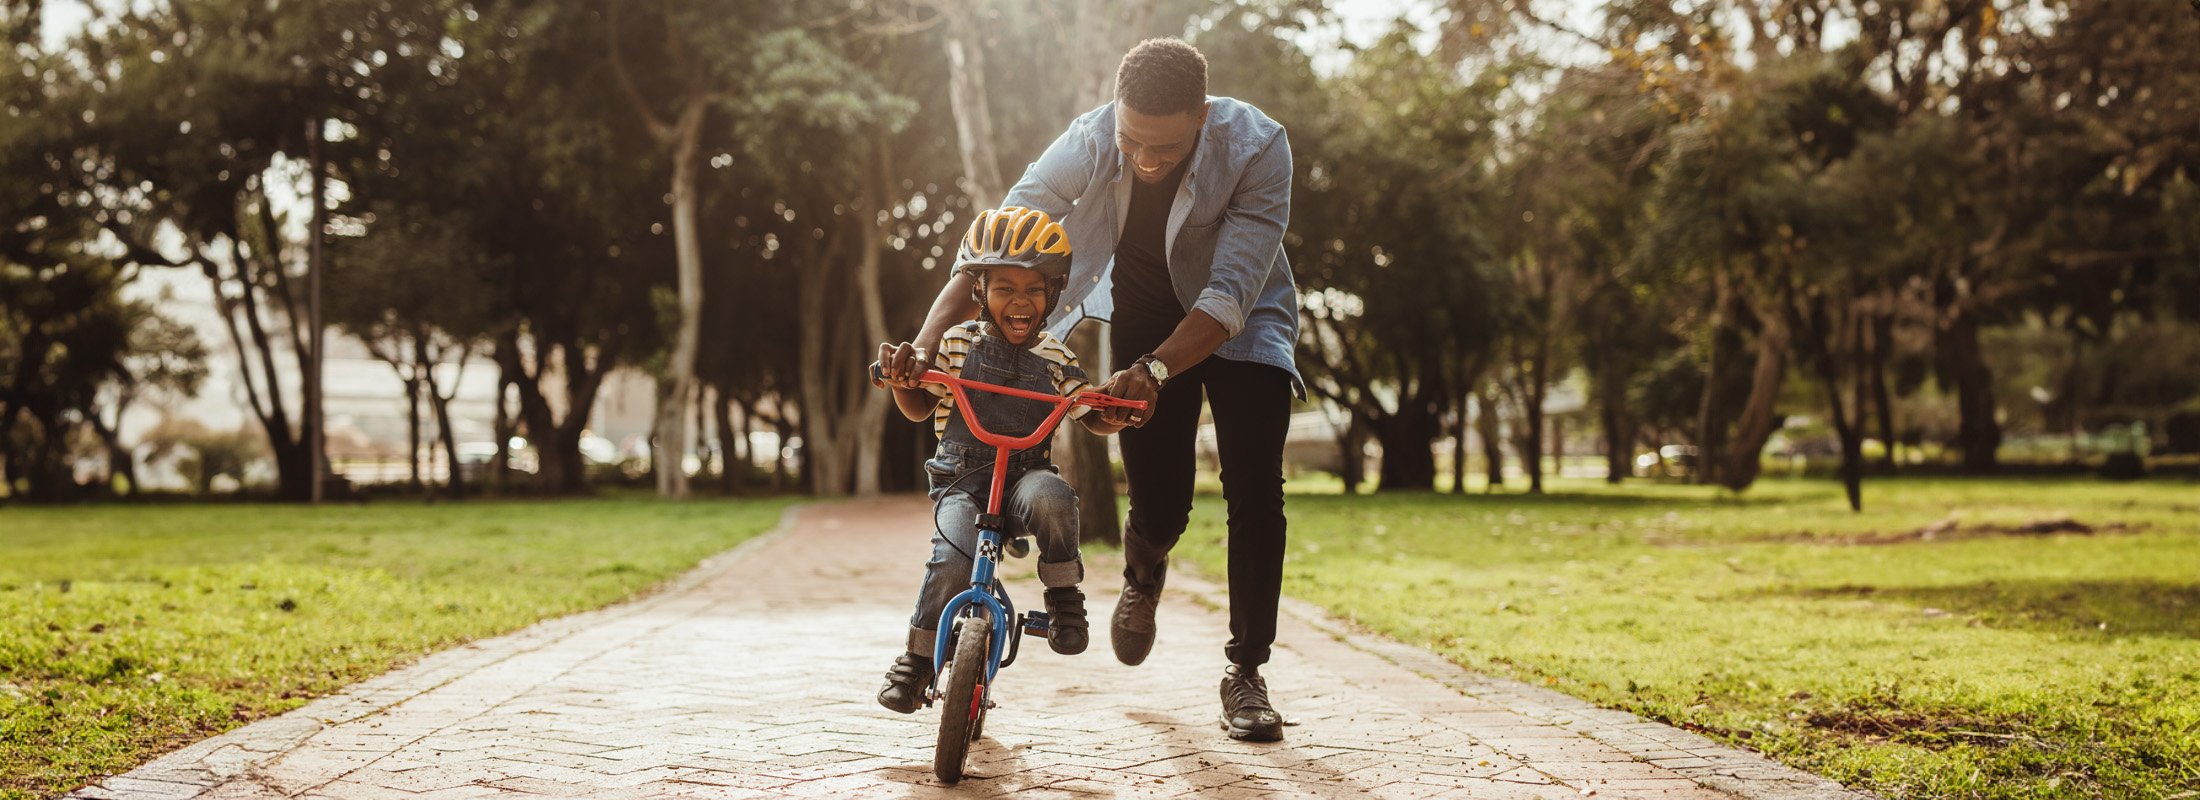 father teaching his son cycling at park